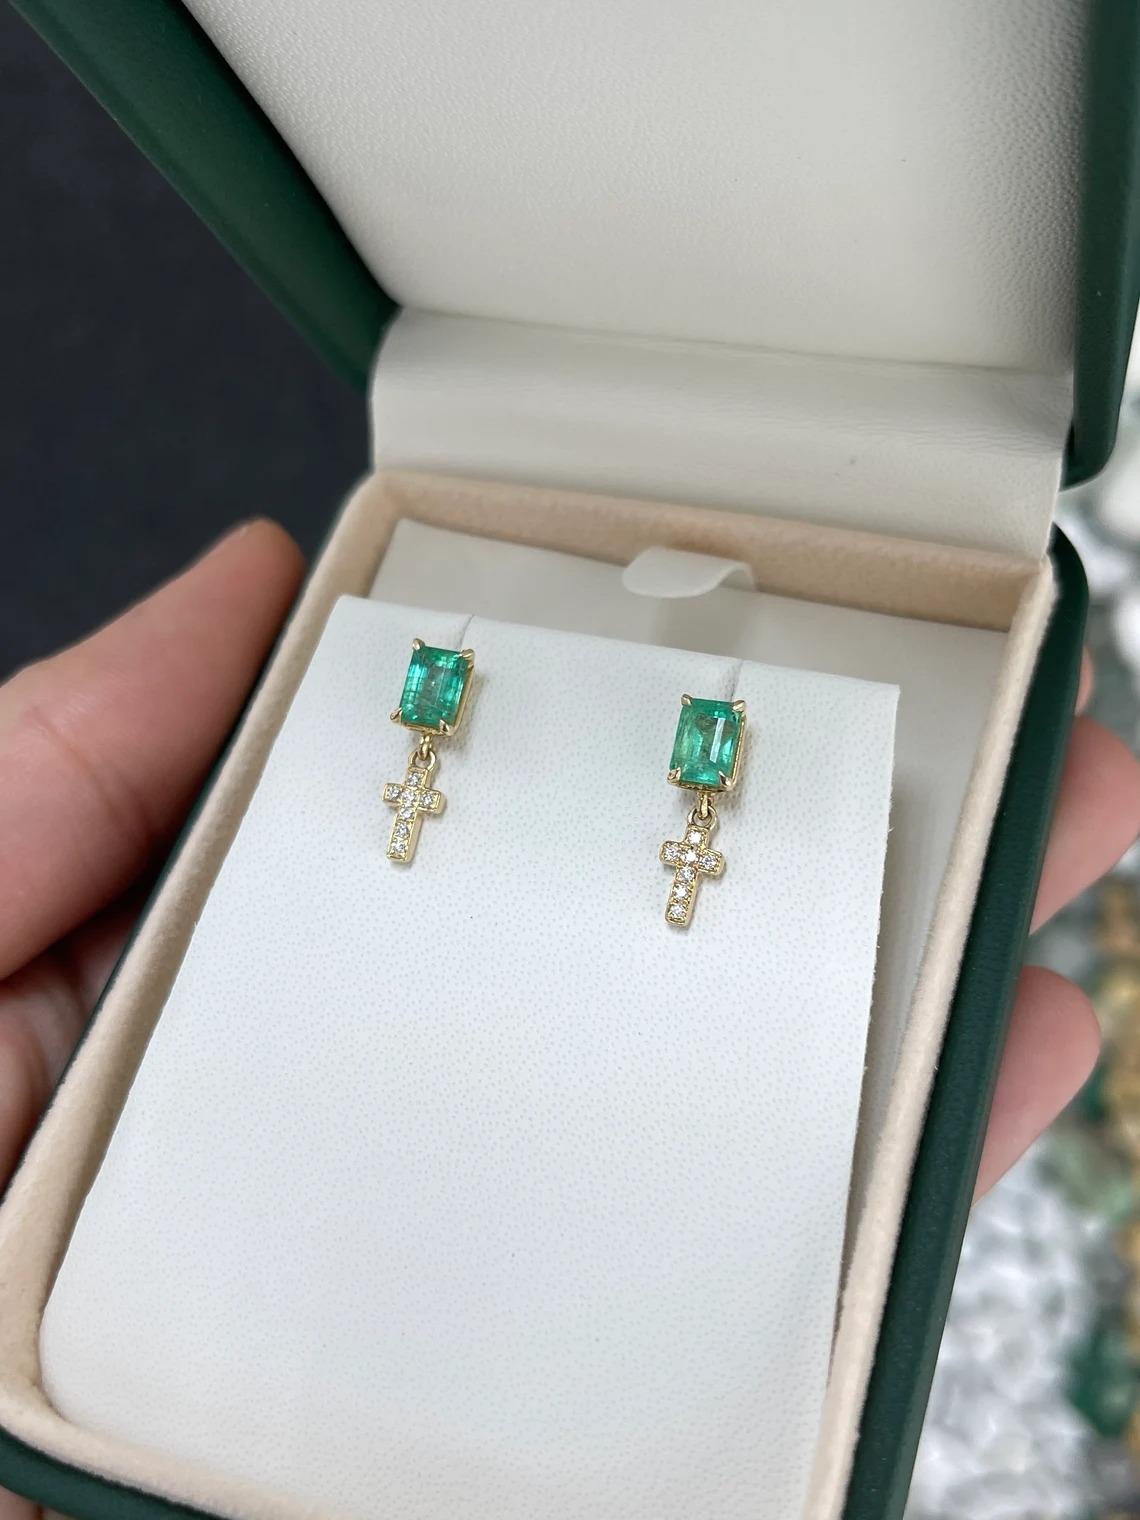 These exquisite emerald and diamond cross earrings feature natural emeralds with a lush green color, stunning emerald cut, and good clarity and luster. The emeralds are securely prong-set, serving as the radiant studs. Below the emerald studs,